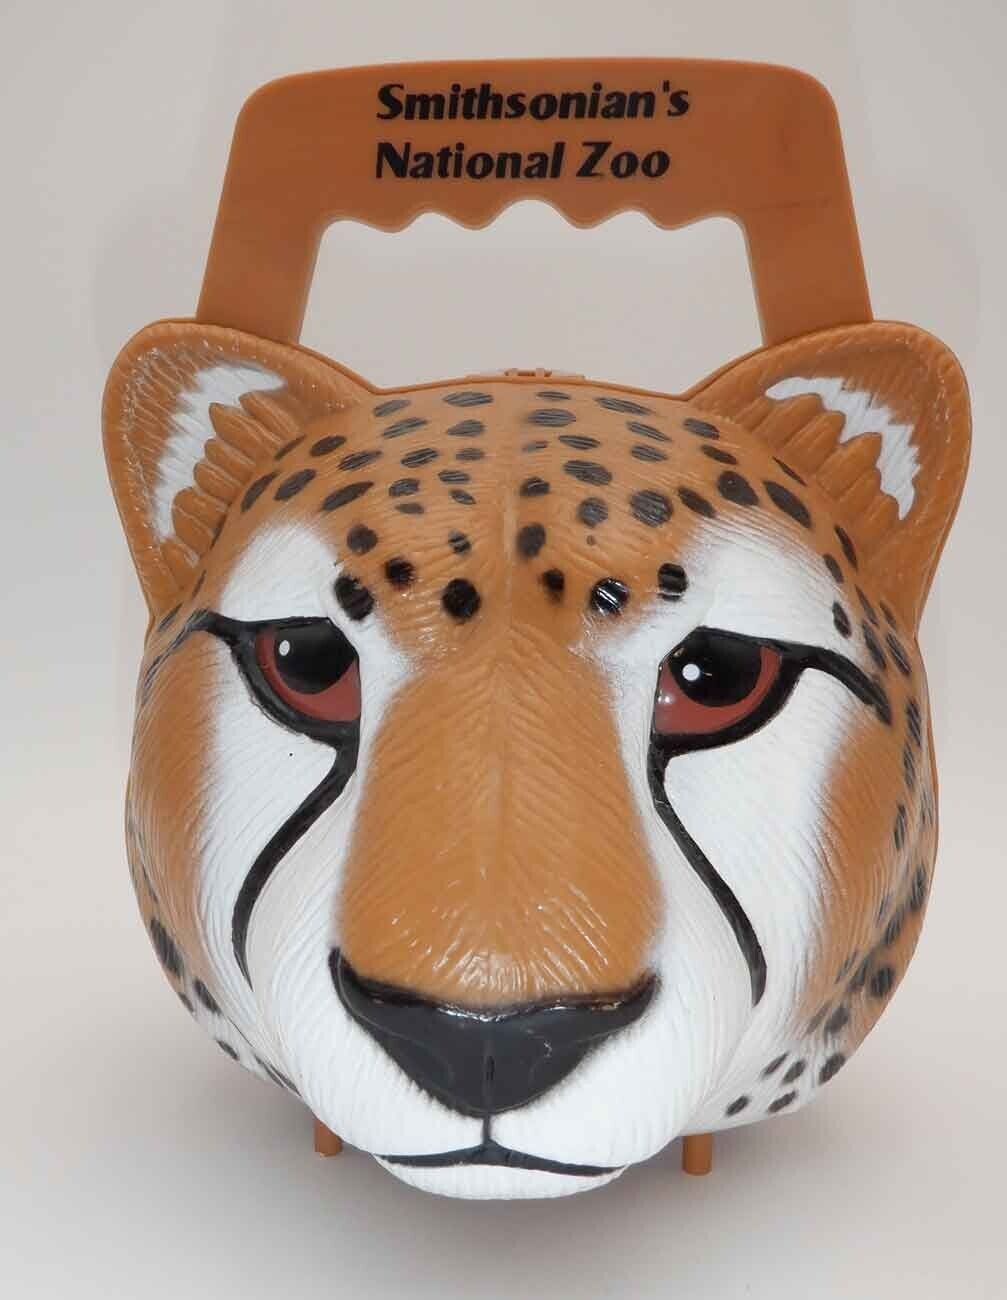 LEOPARD HEAD Plastic PURSE / POCKETBOOK or LUNCHBOX   SMITHSONIAN’s National Zoo